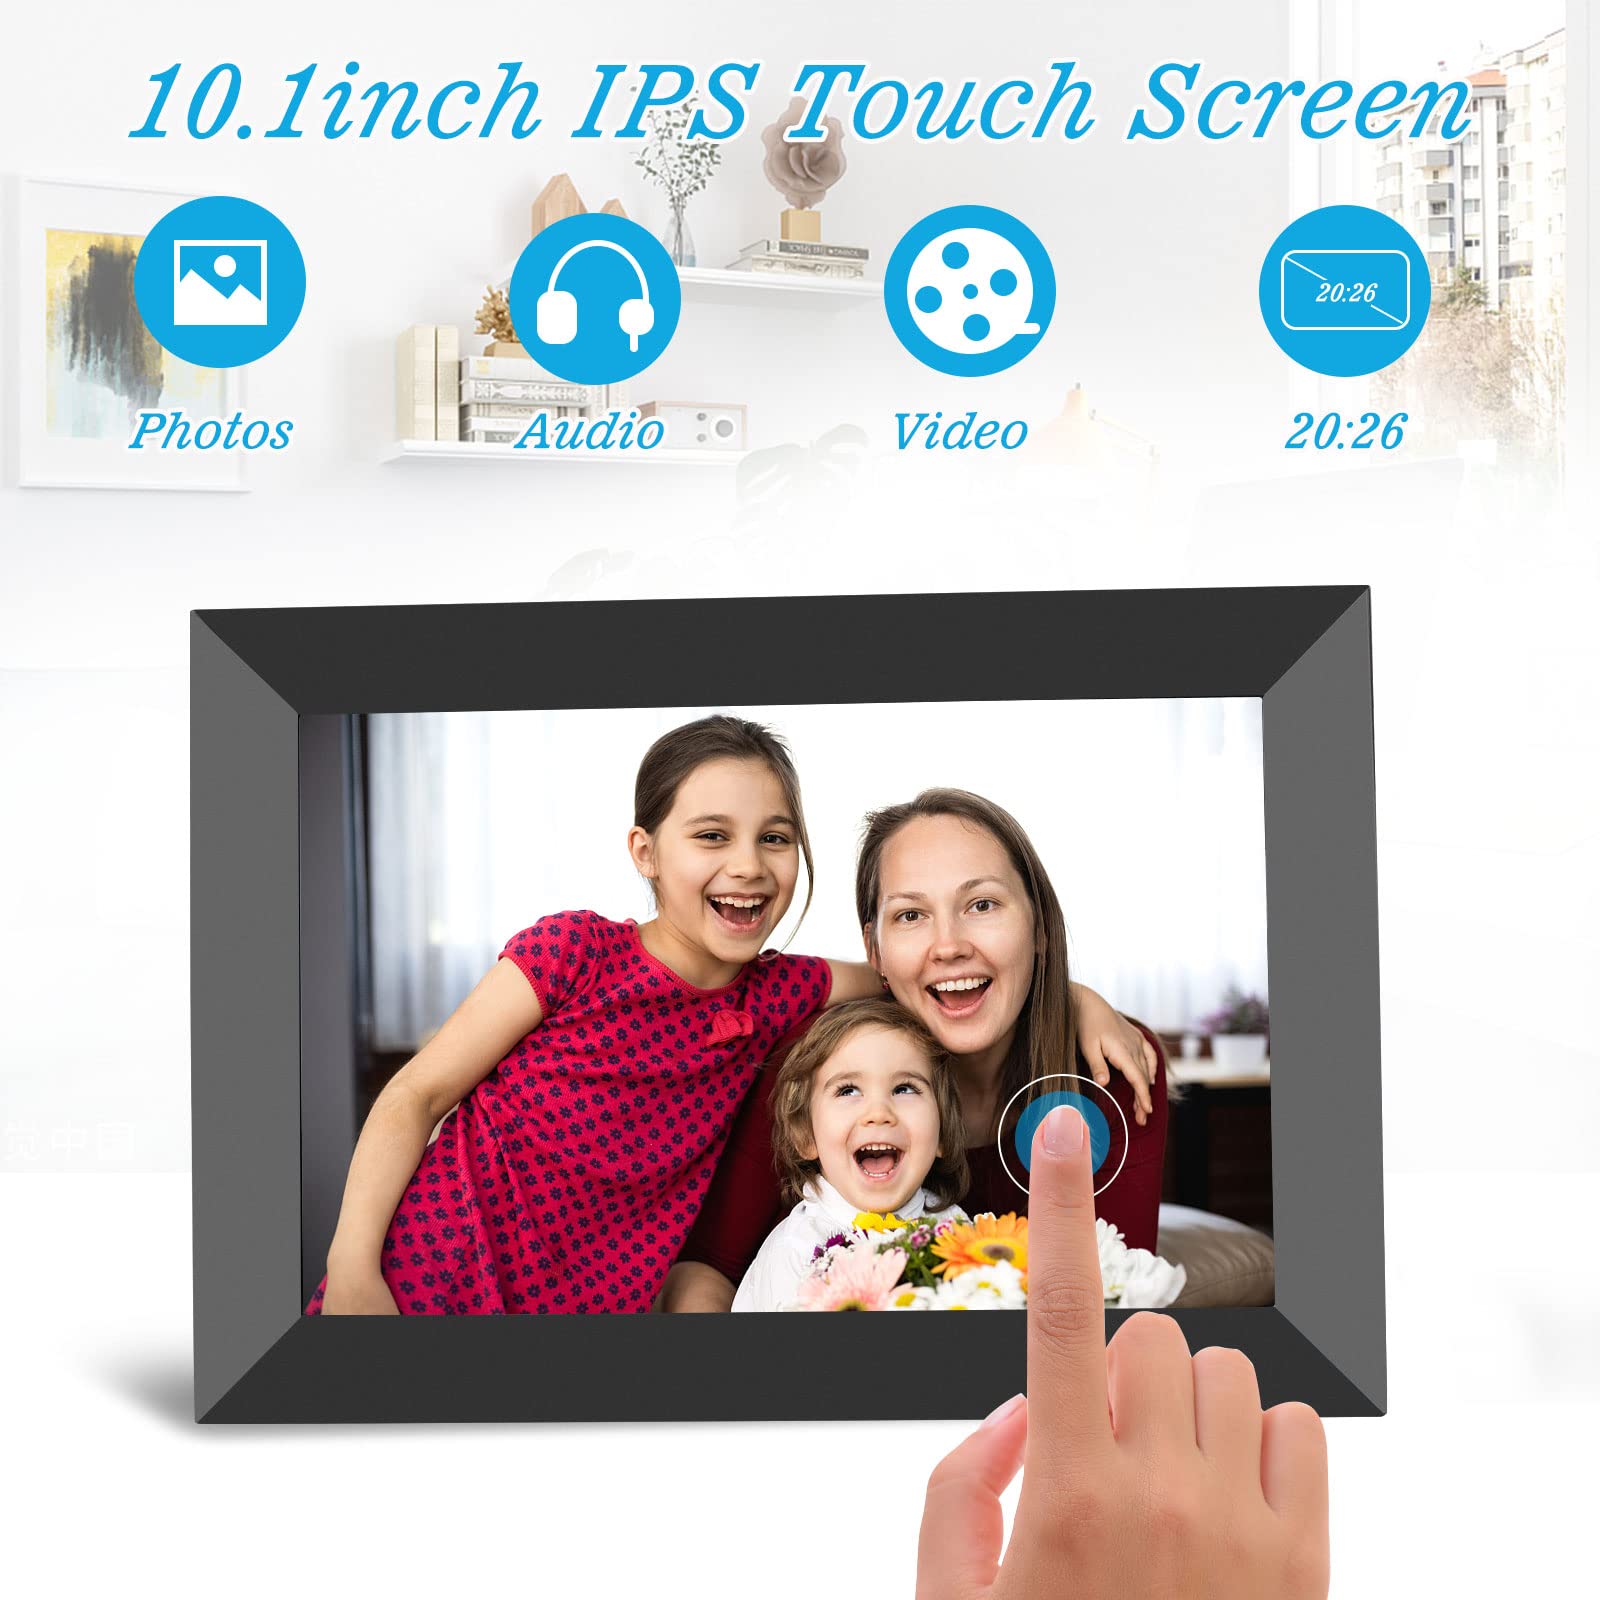 WiFi Digital Picture Frame 10.1 Inch Smart Digital Photo Frame with IPS Touch Screen HD Display, 16GB Storage Easy Setup to Share Photos or Videos Anywhere via Free Frameo APP (Black Frame)